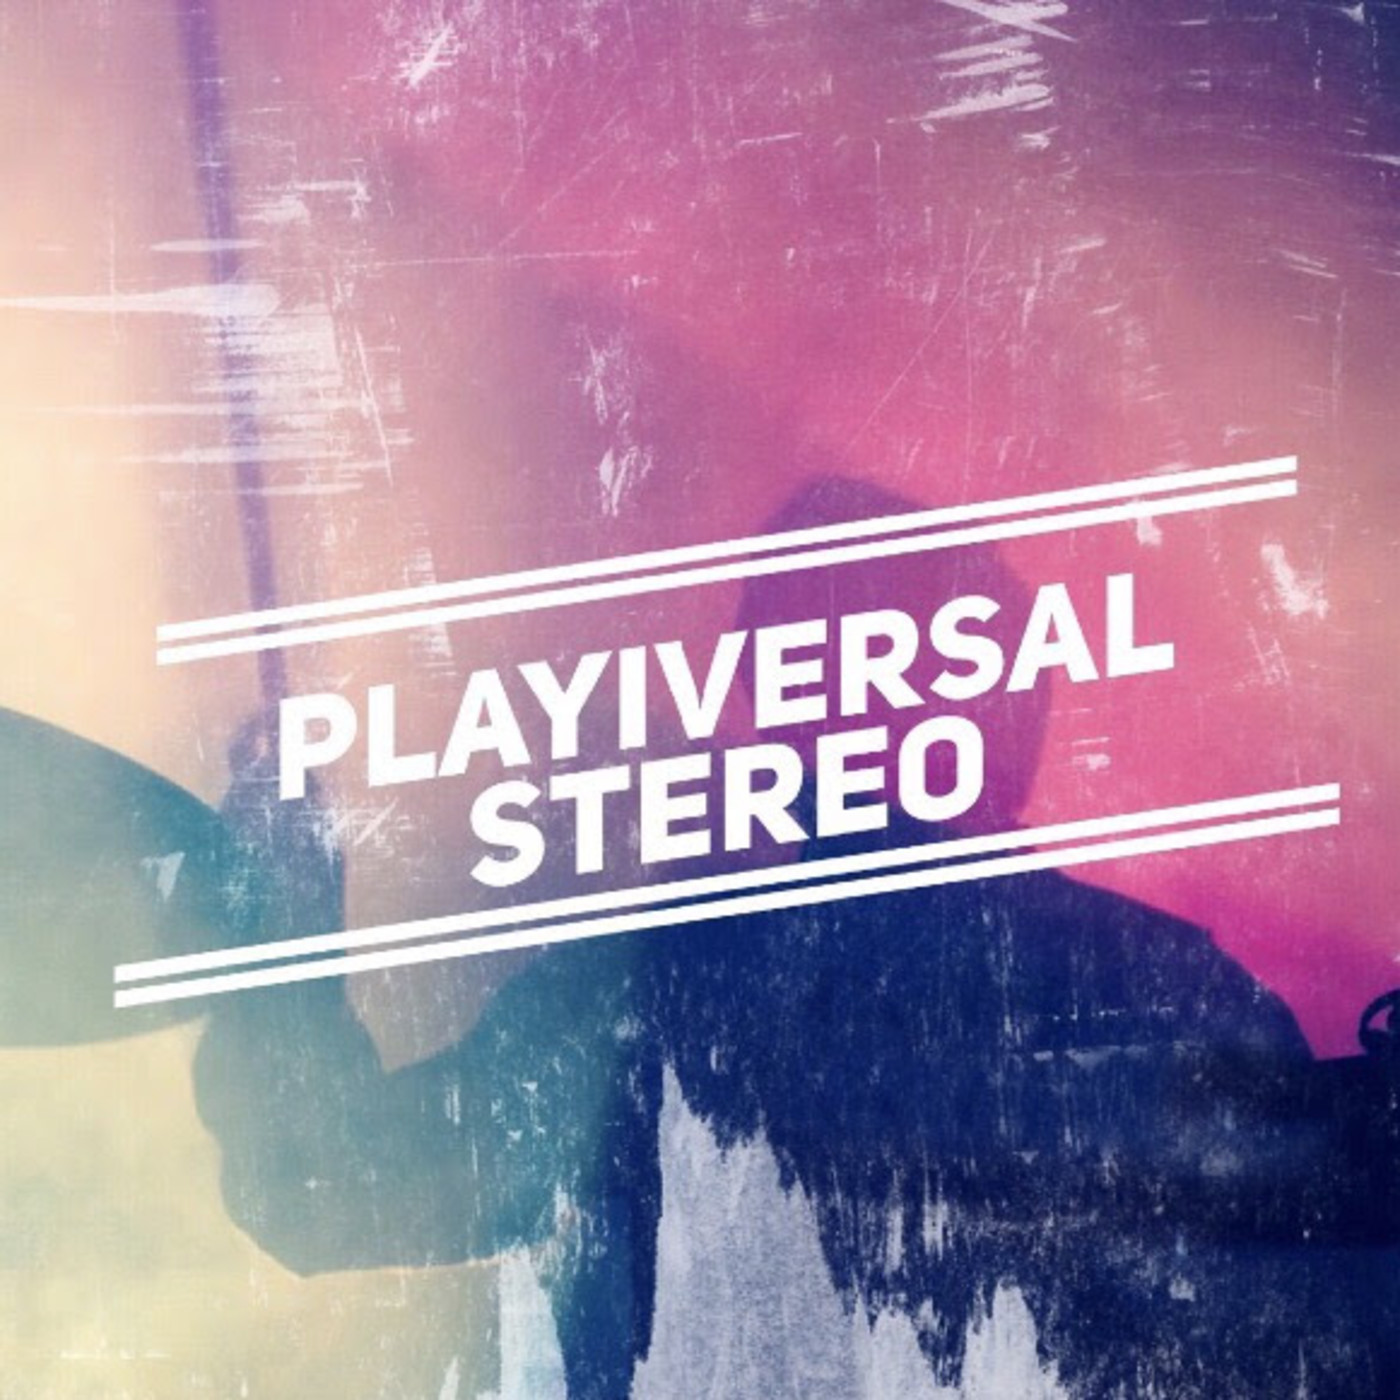 Playiversal Stereo